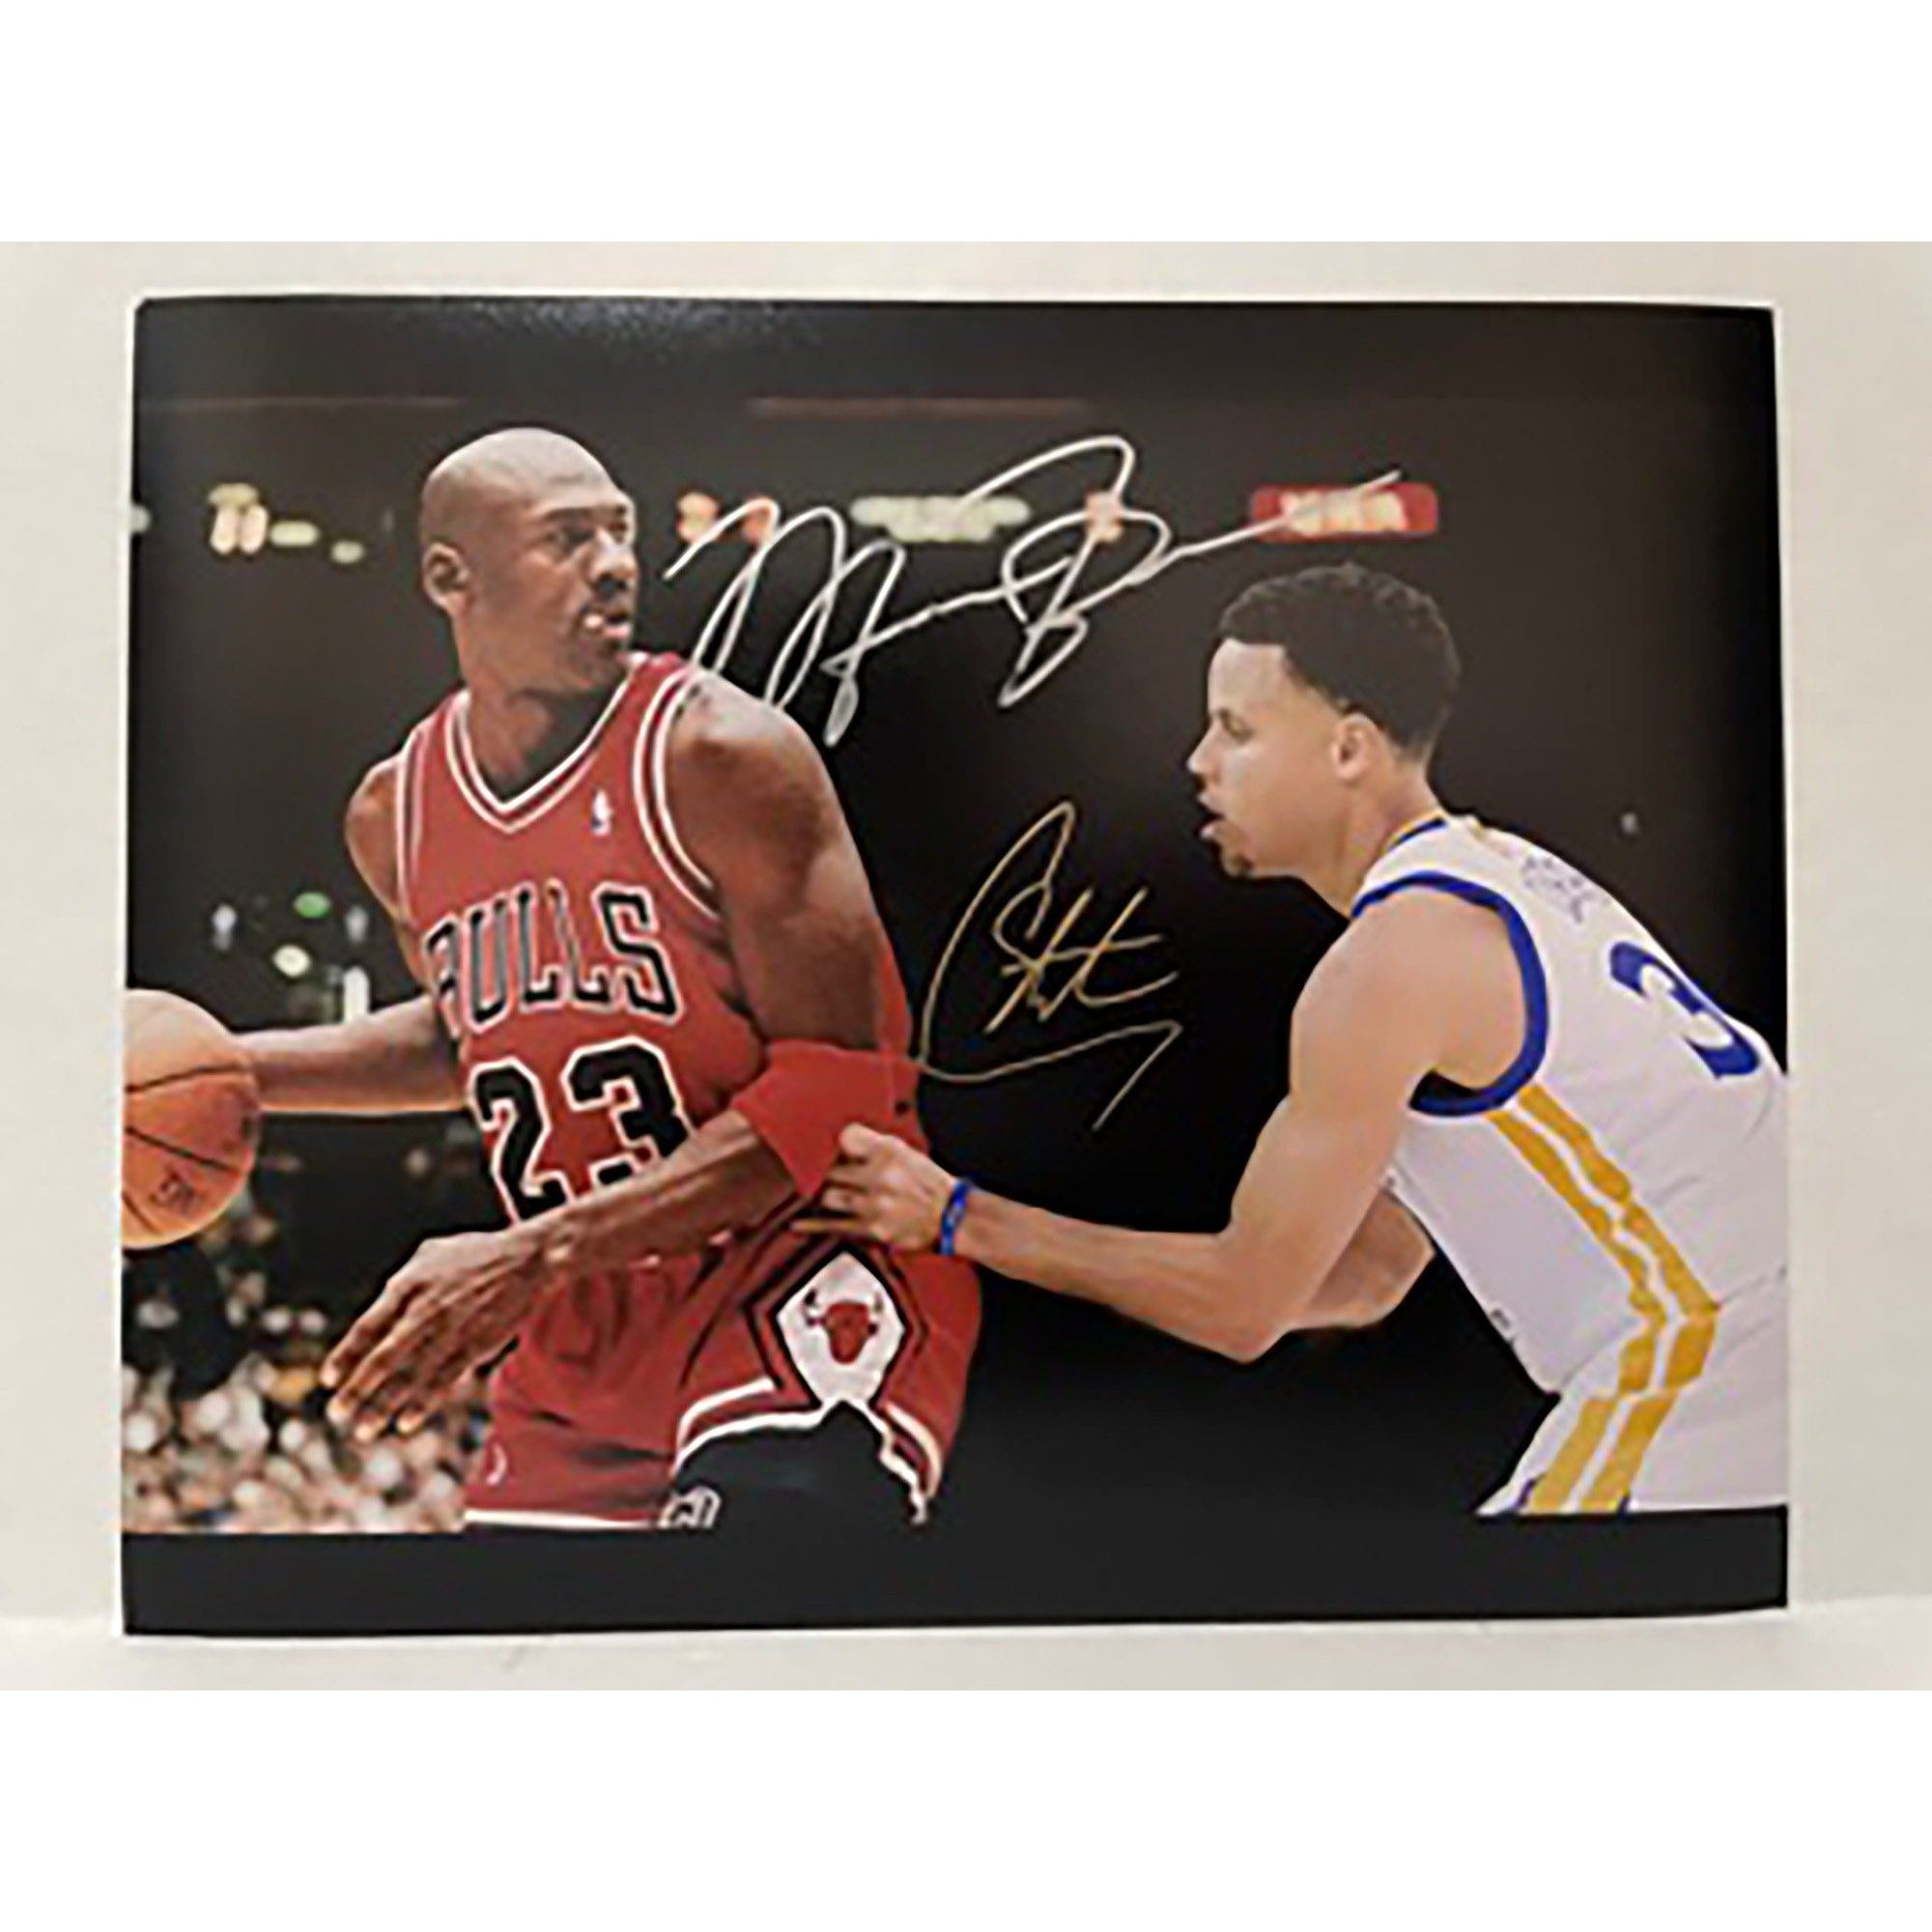 Michael Jordan 8x10 signed with proof